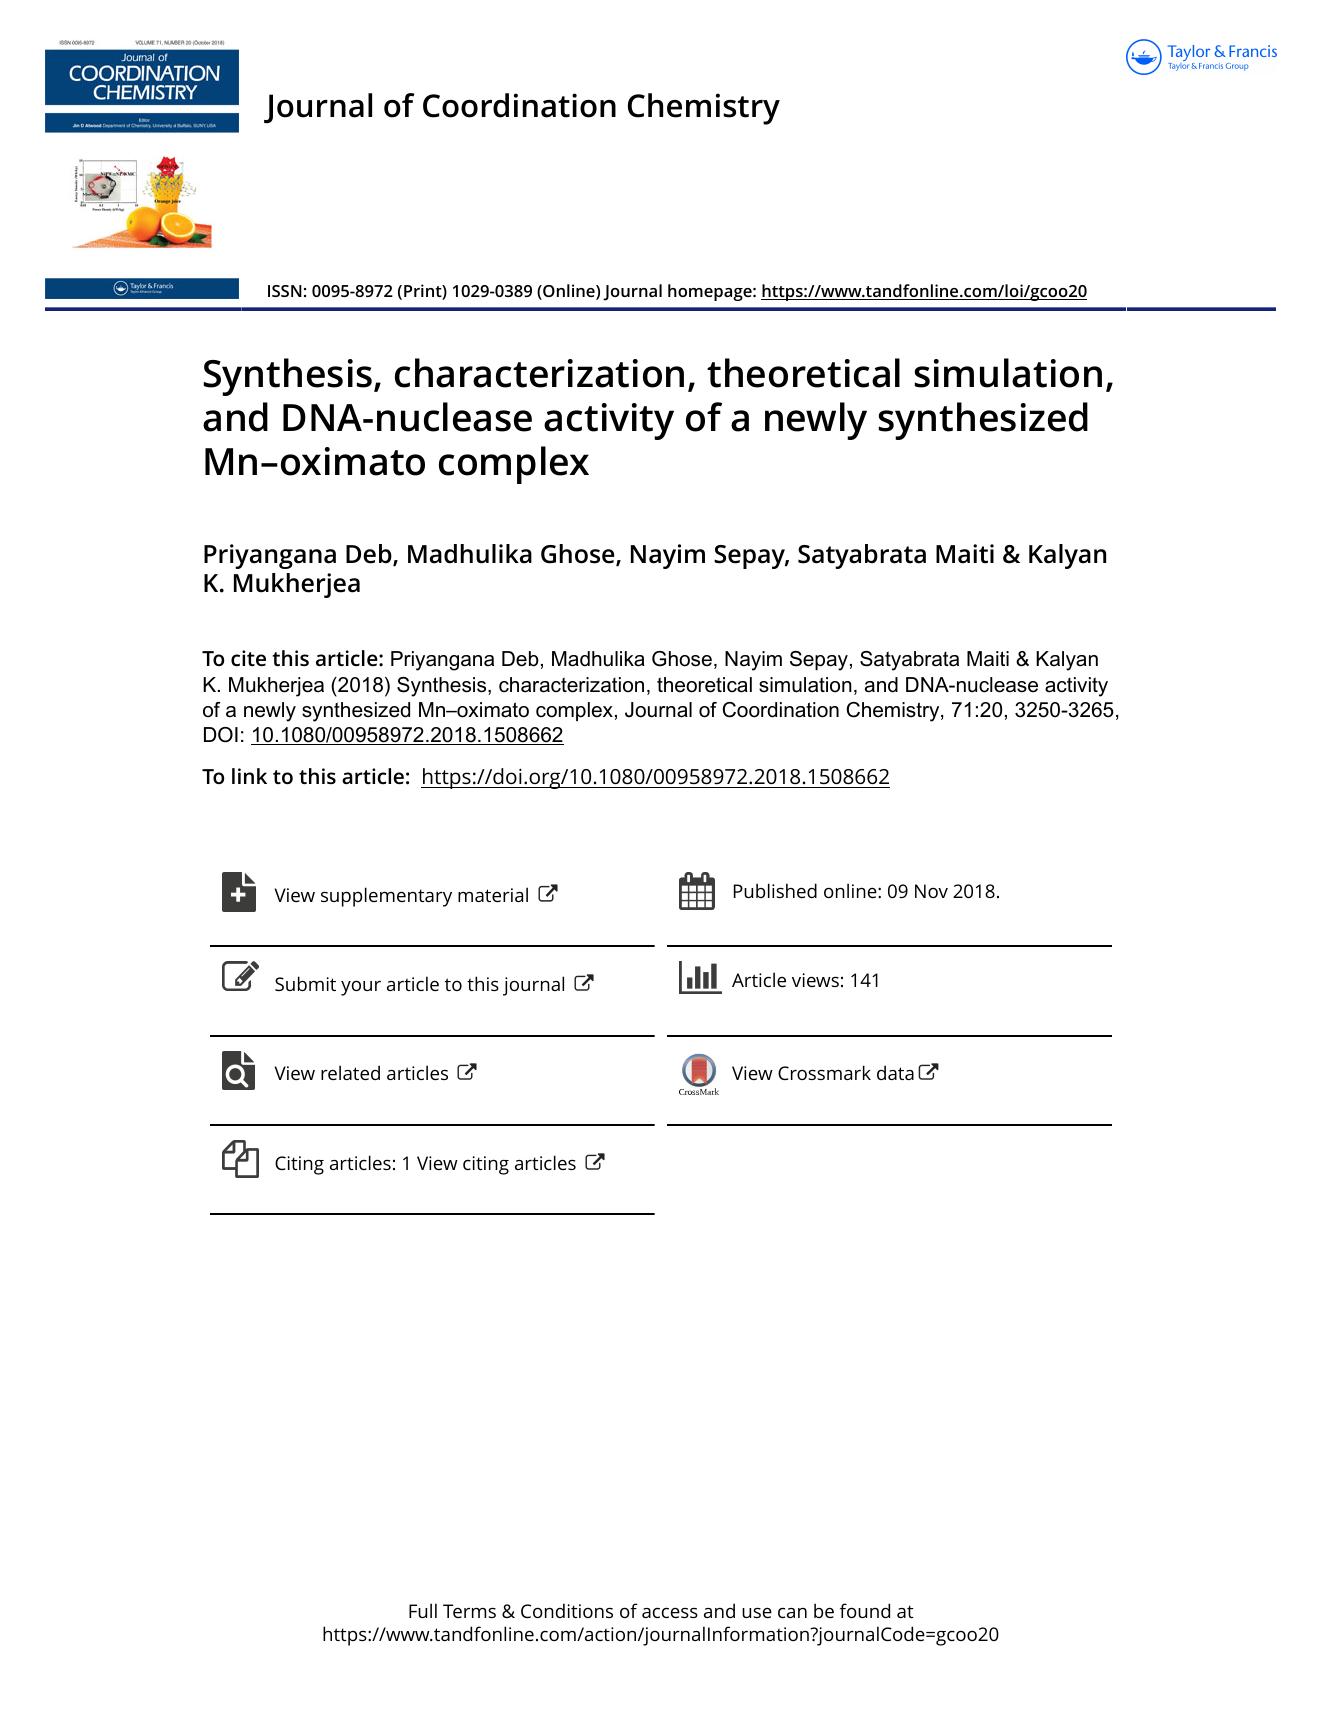 Synthesis, characterization, theoretical simulation, and DNA-nuclease activity of a newly synthesized Mnâoximato complex by Deb Priyangana & Ghose Madhulika & Sepay Nayim & Maiti Satyabrata & Mukherjea Kalyan K